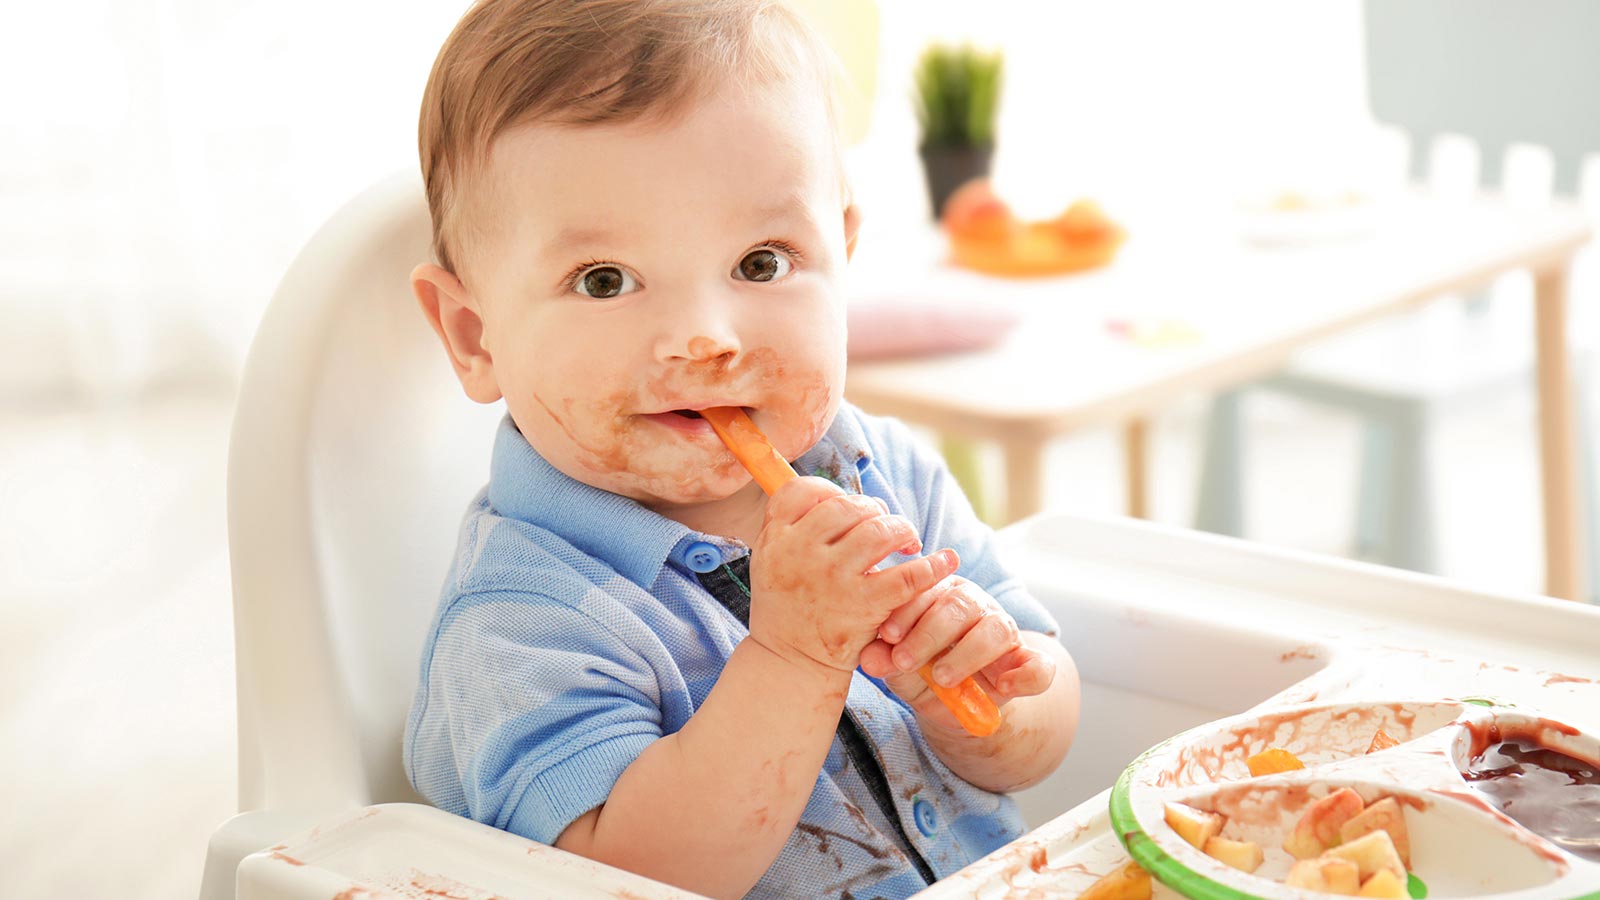 https://sharonmazel.com/wp-content/uploads/2021/08/9-truths-and-myths-about-starting-solids.jpg